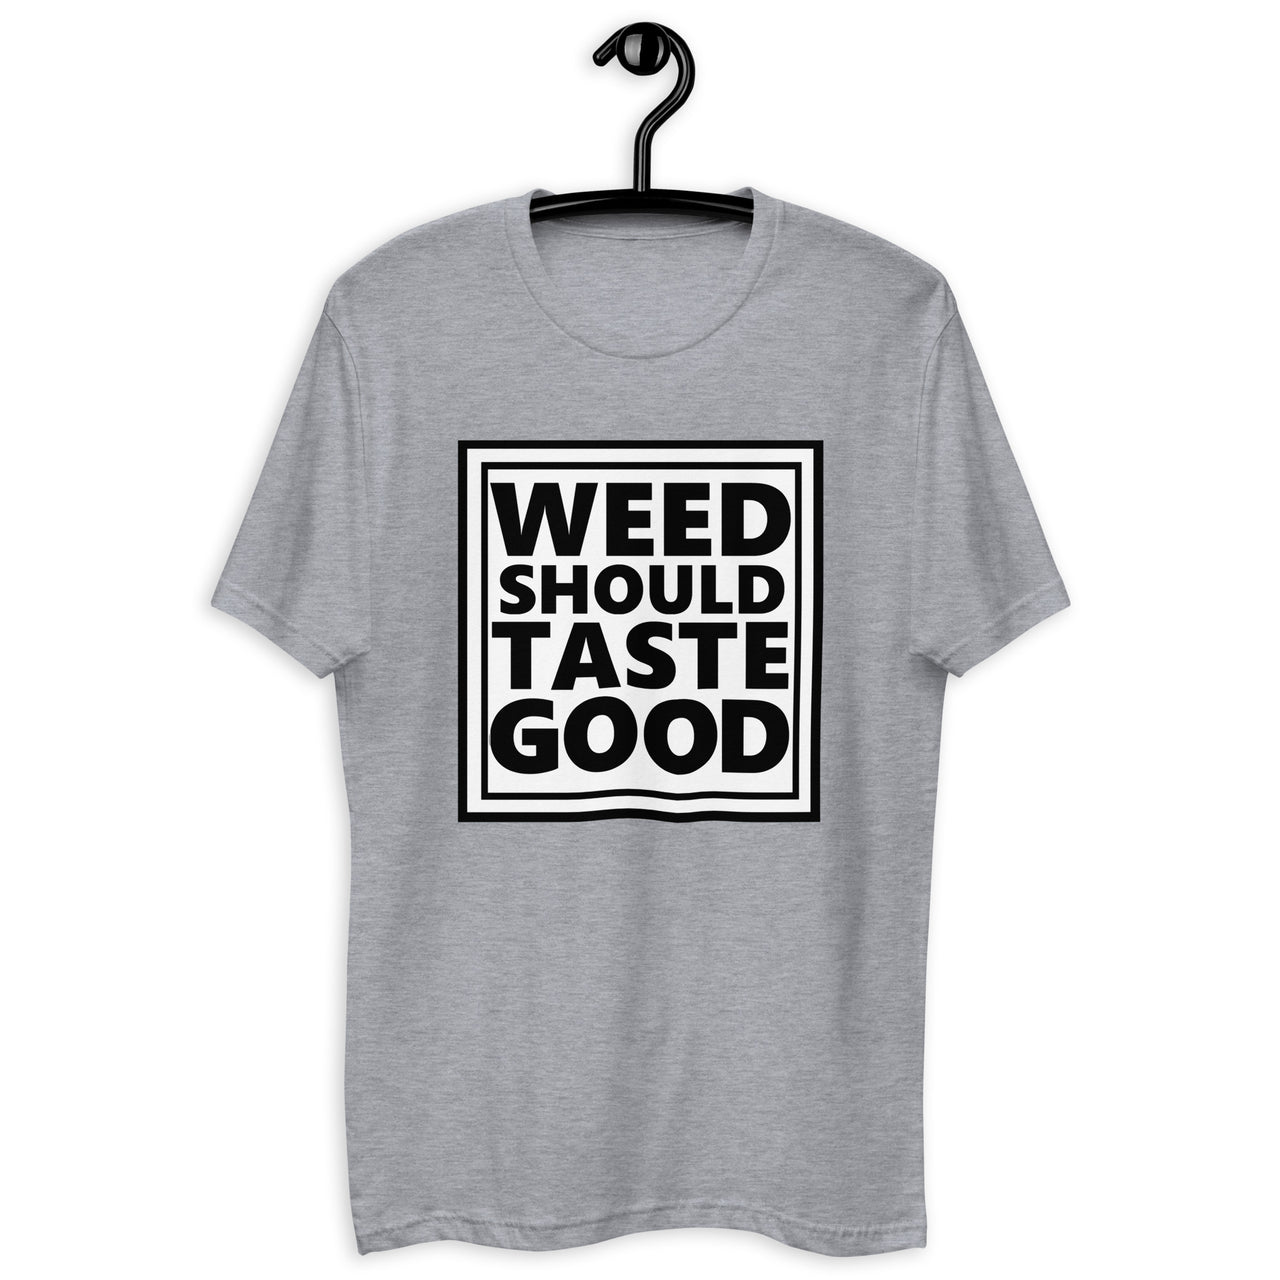 Weed Should Taste Good Fitted Next Level T-shirt